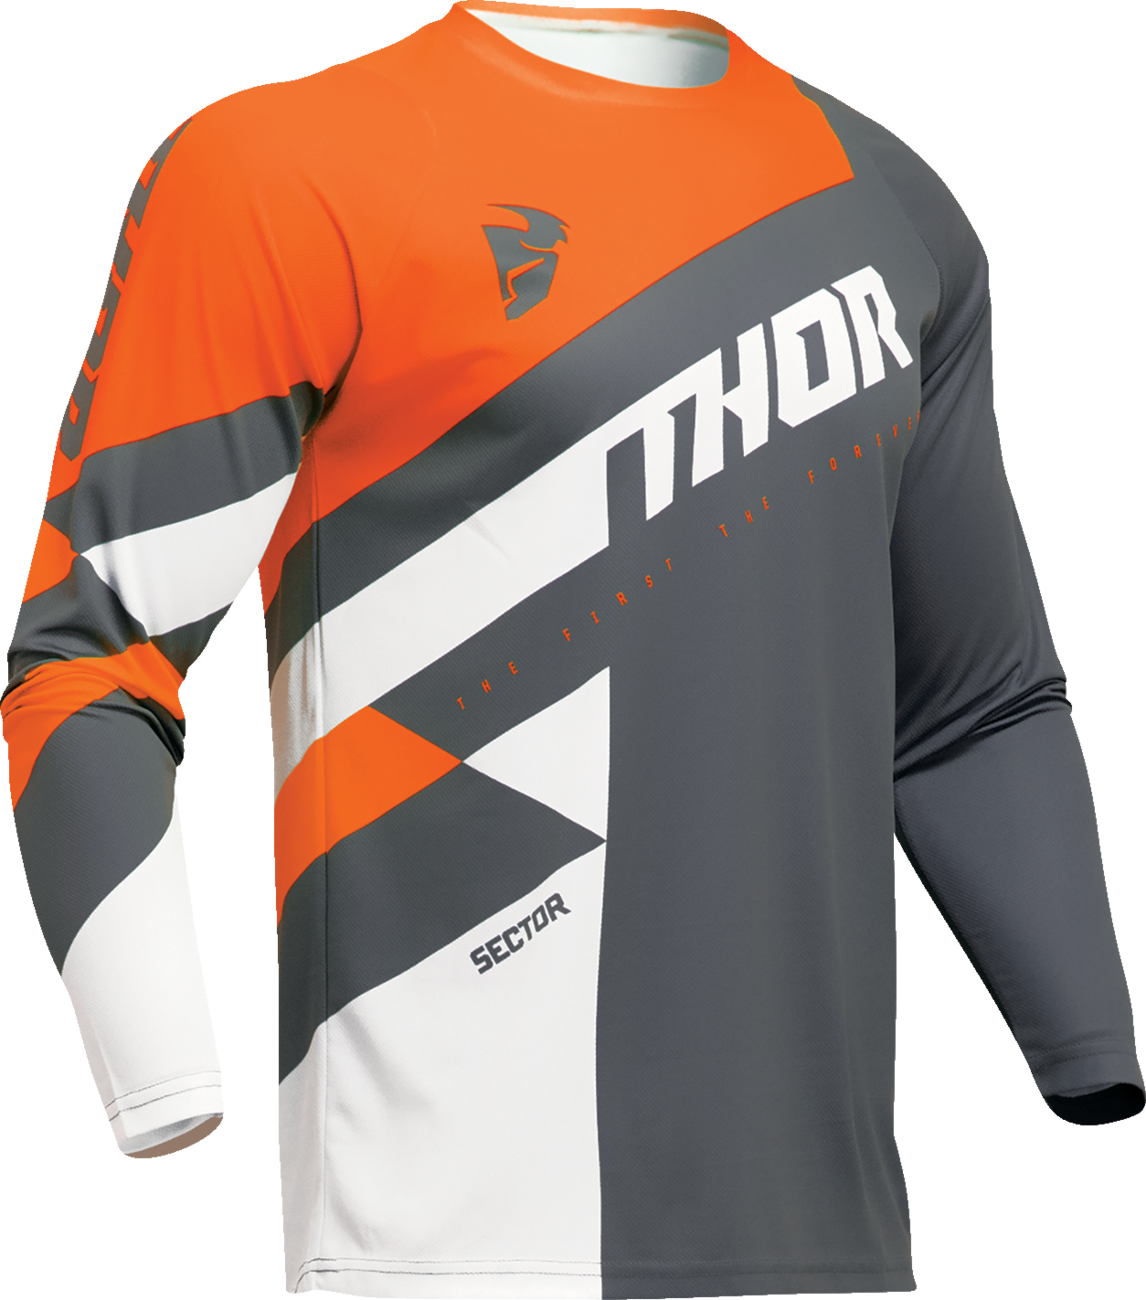 THOR Sector Checker Jersey - Charcoal/Orange - 3XL 2910-7592